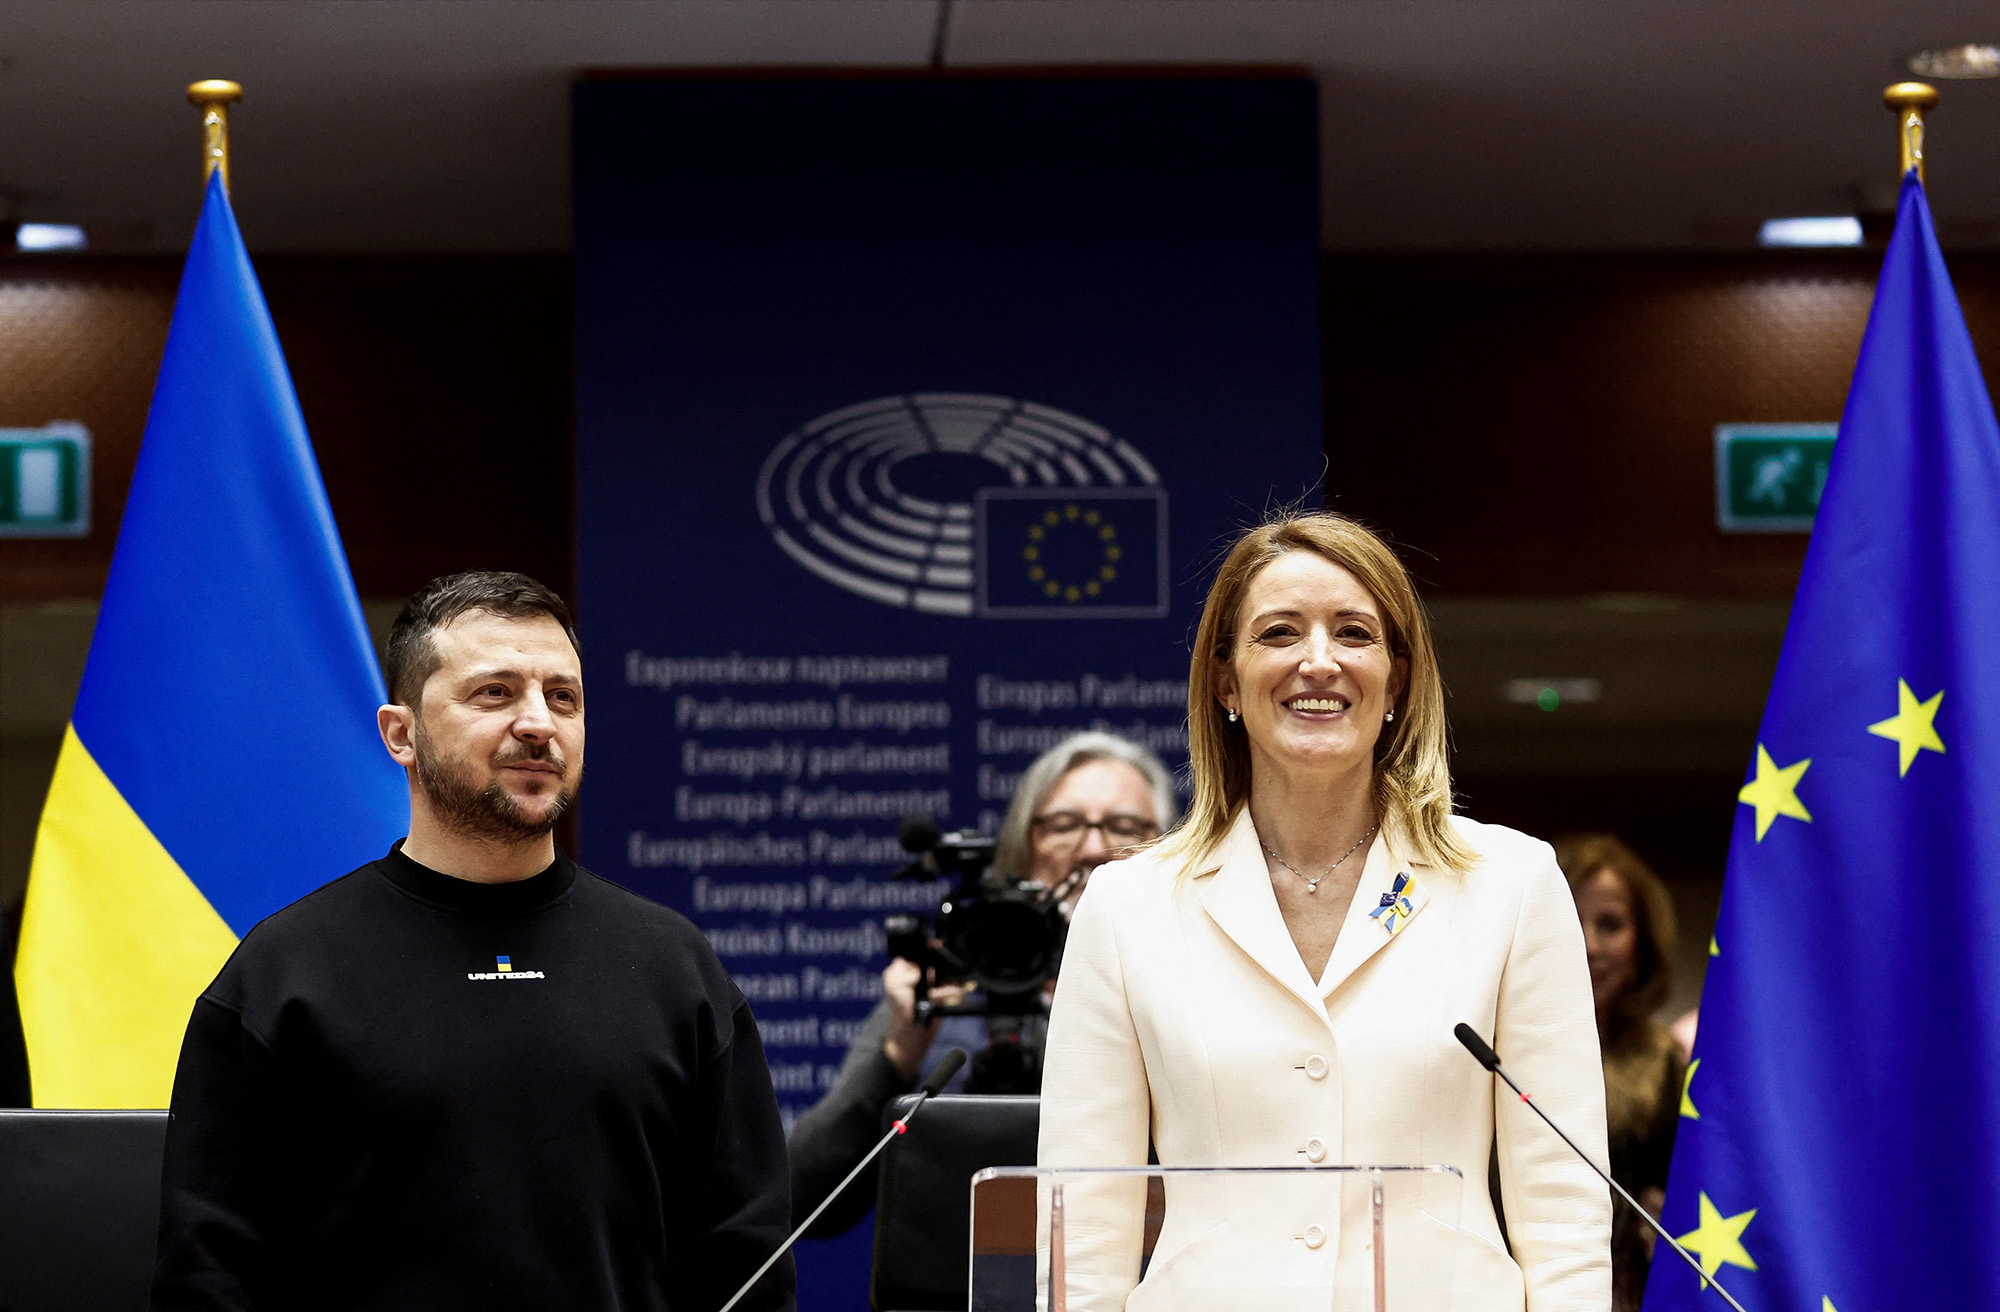 Ukraine's president Volodymyr Zelensky, left, poses next to European Parliament President Roberta Metsola as he arrives for a summit at EU parliament in Brussels, Belgium, on February 9.